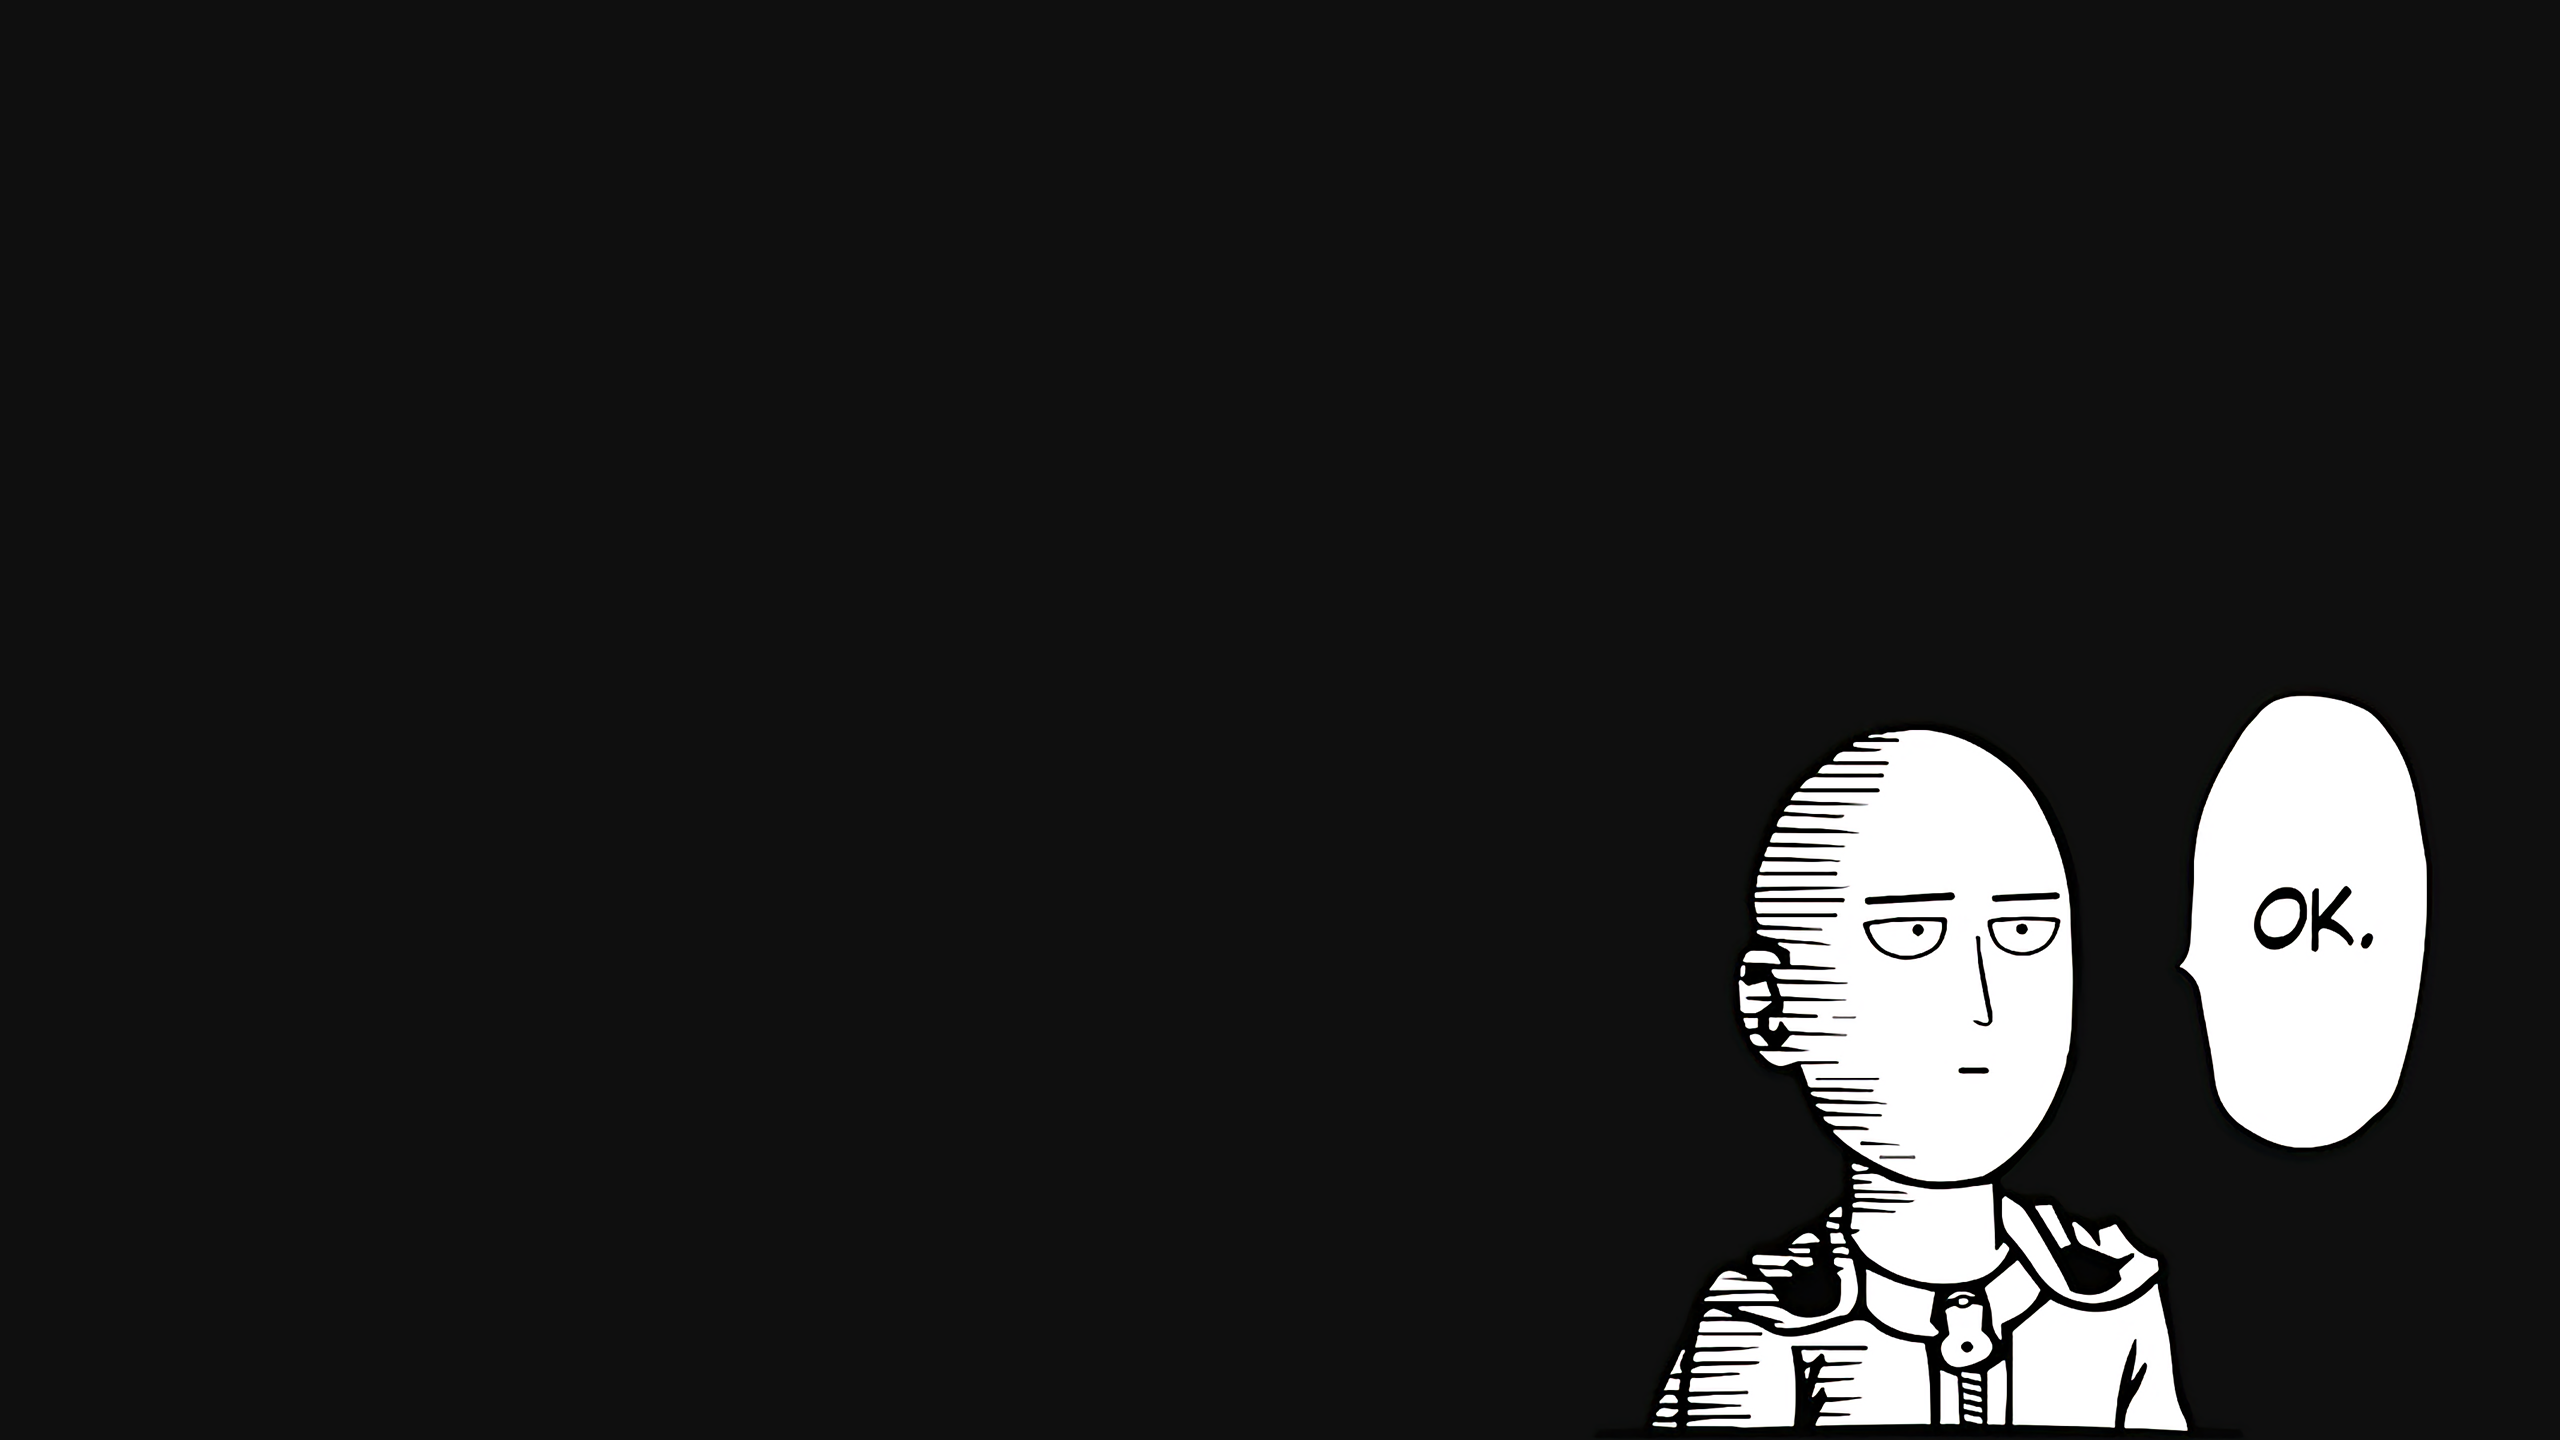 Simple Saitama wallpaper I just made for personal use. (2560 x 1440)